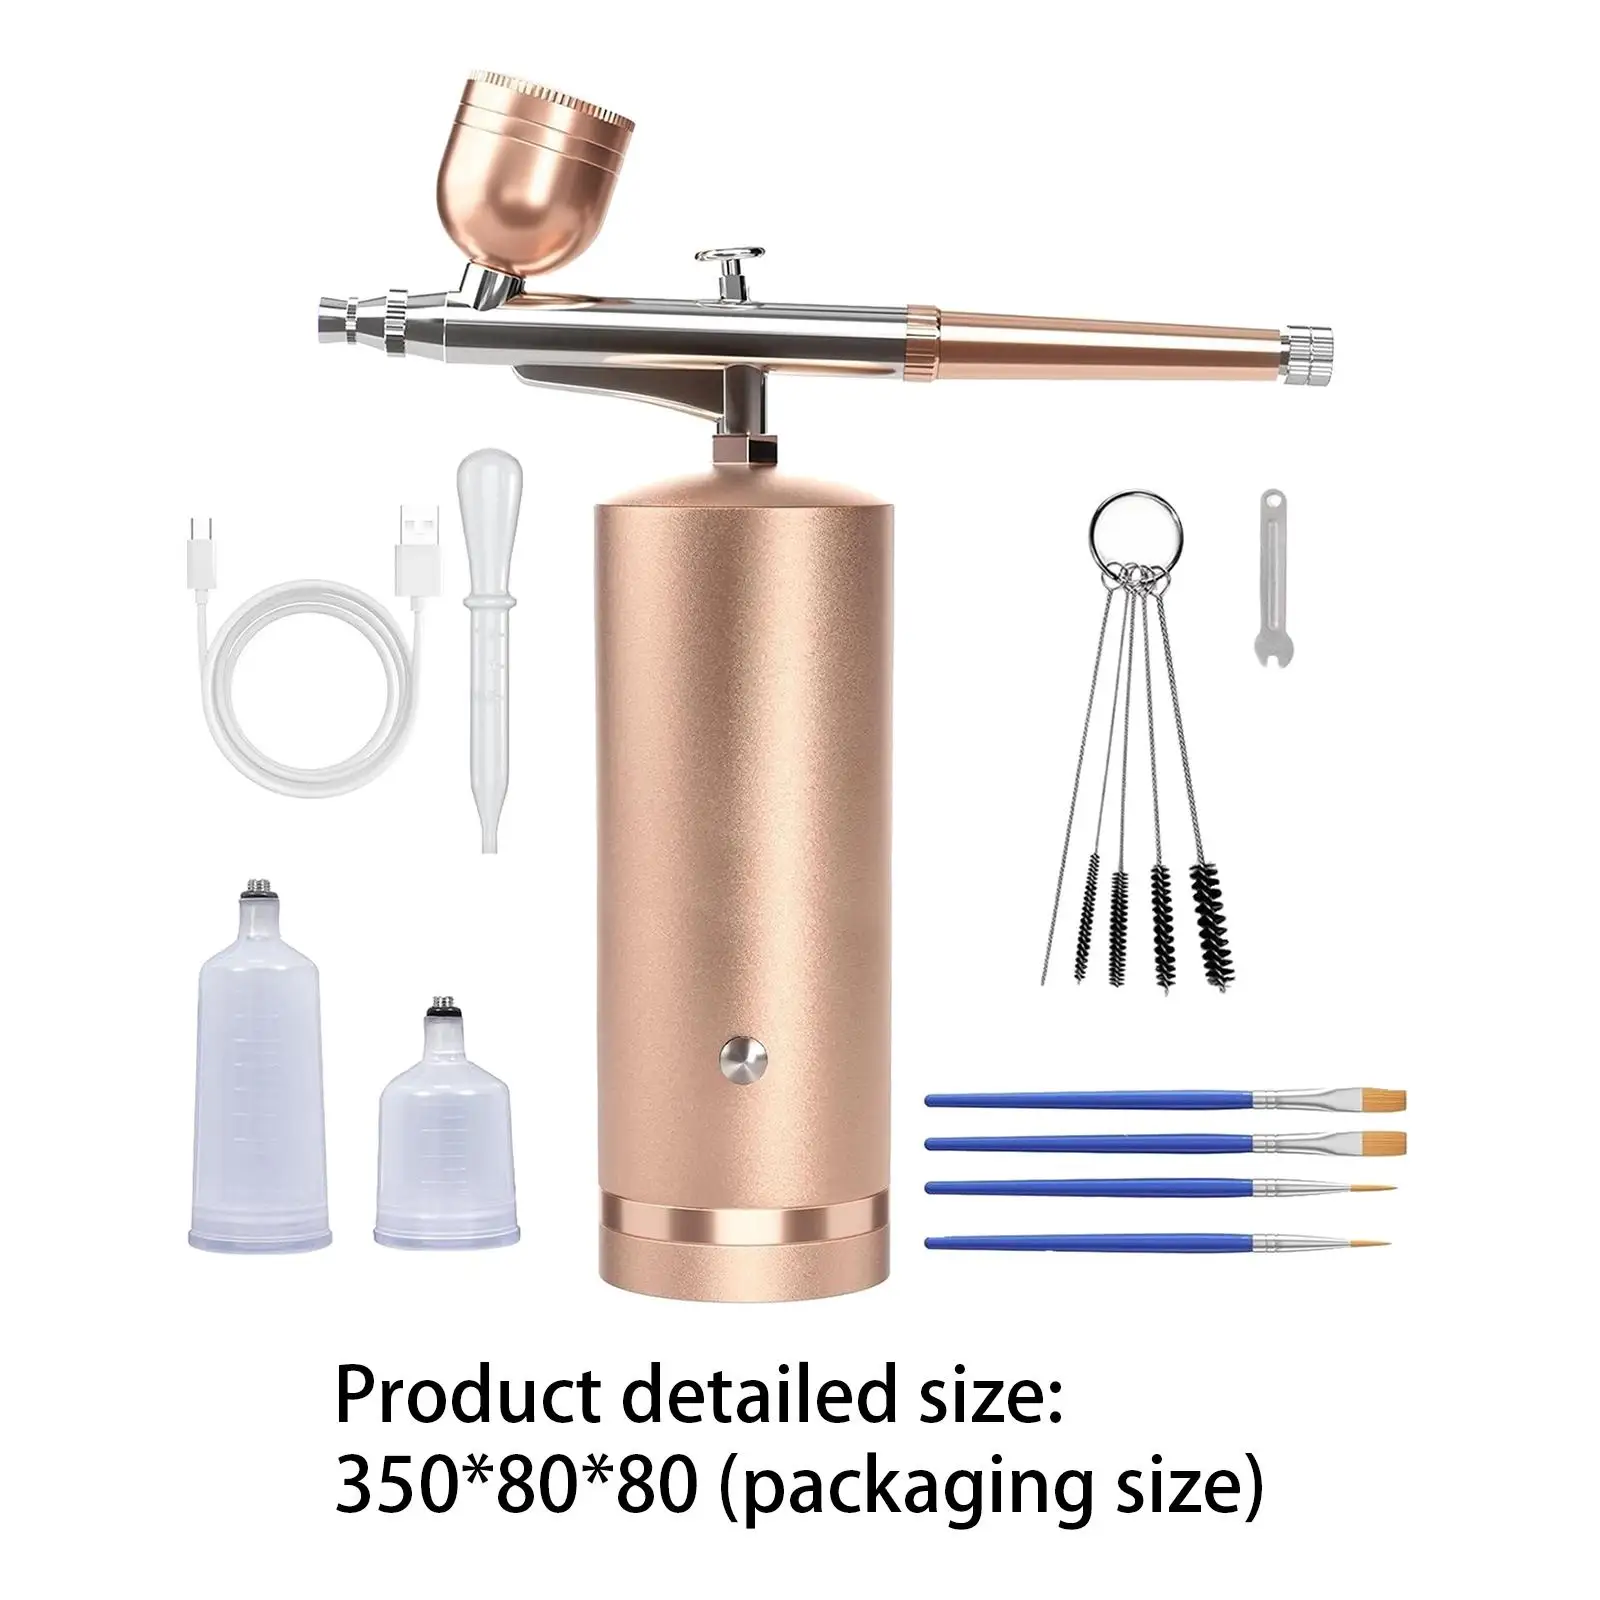 Airbrush Kits with Compressor Portable Handheld Nail Airbrush Machine for Painting Makeup Model Painting Craft Hobby Cakes Decor